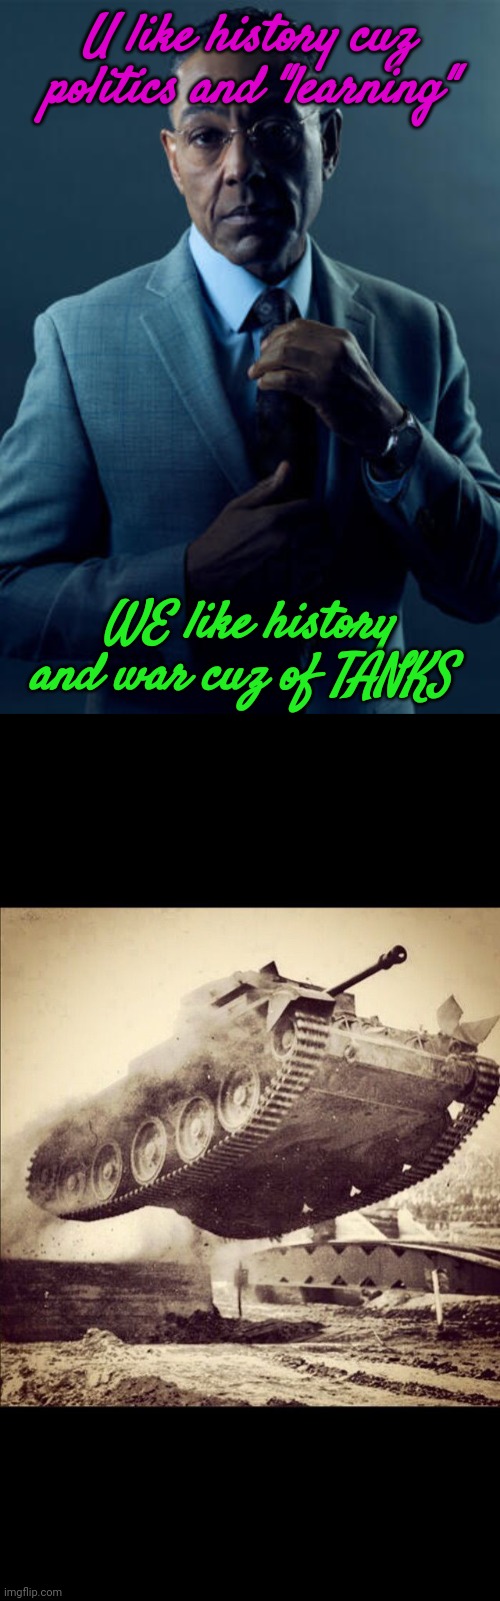 We are definitely not the same...This could be reposted to get people too join! | U like history cuz politics and "learning"; WE like history and war cuz of TANKS | image tagged in no we are not the same,tanks away | made w/ Imgflip meme maker